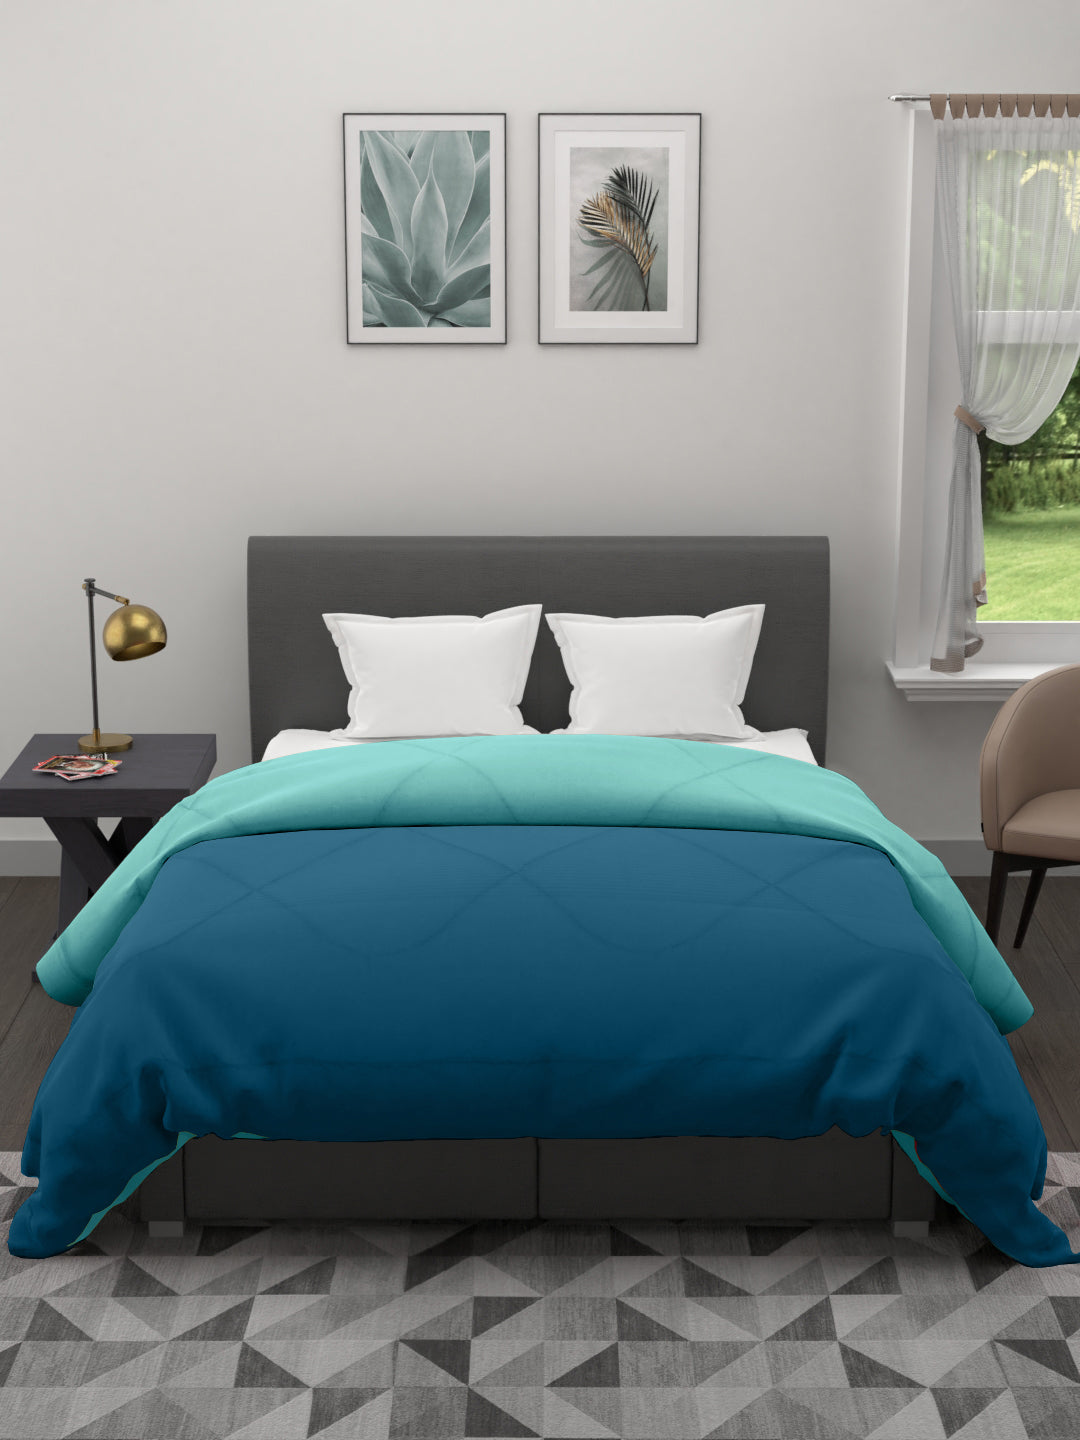 Reversible Double Bed King Size Comforter; 90x100 Inches; Aqua Blue & Dark Blue